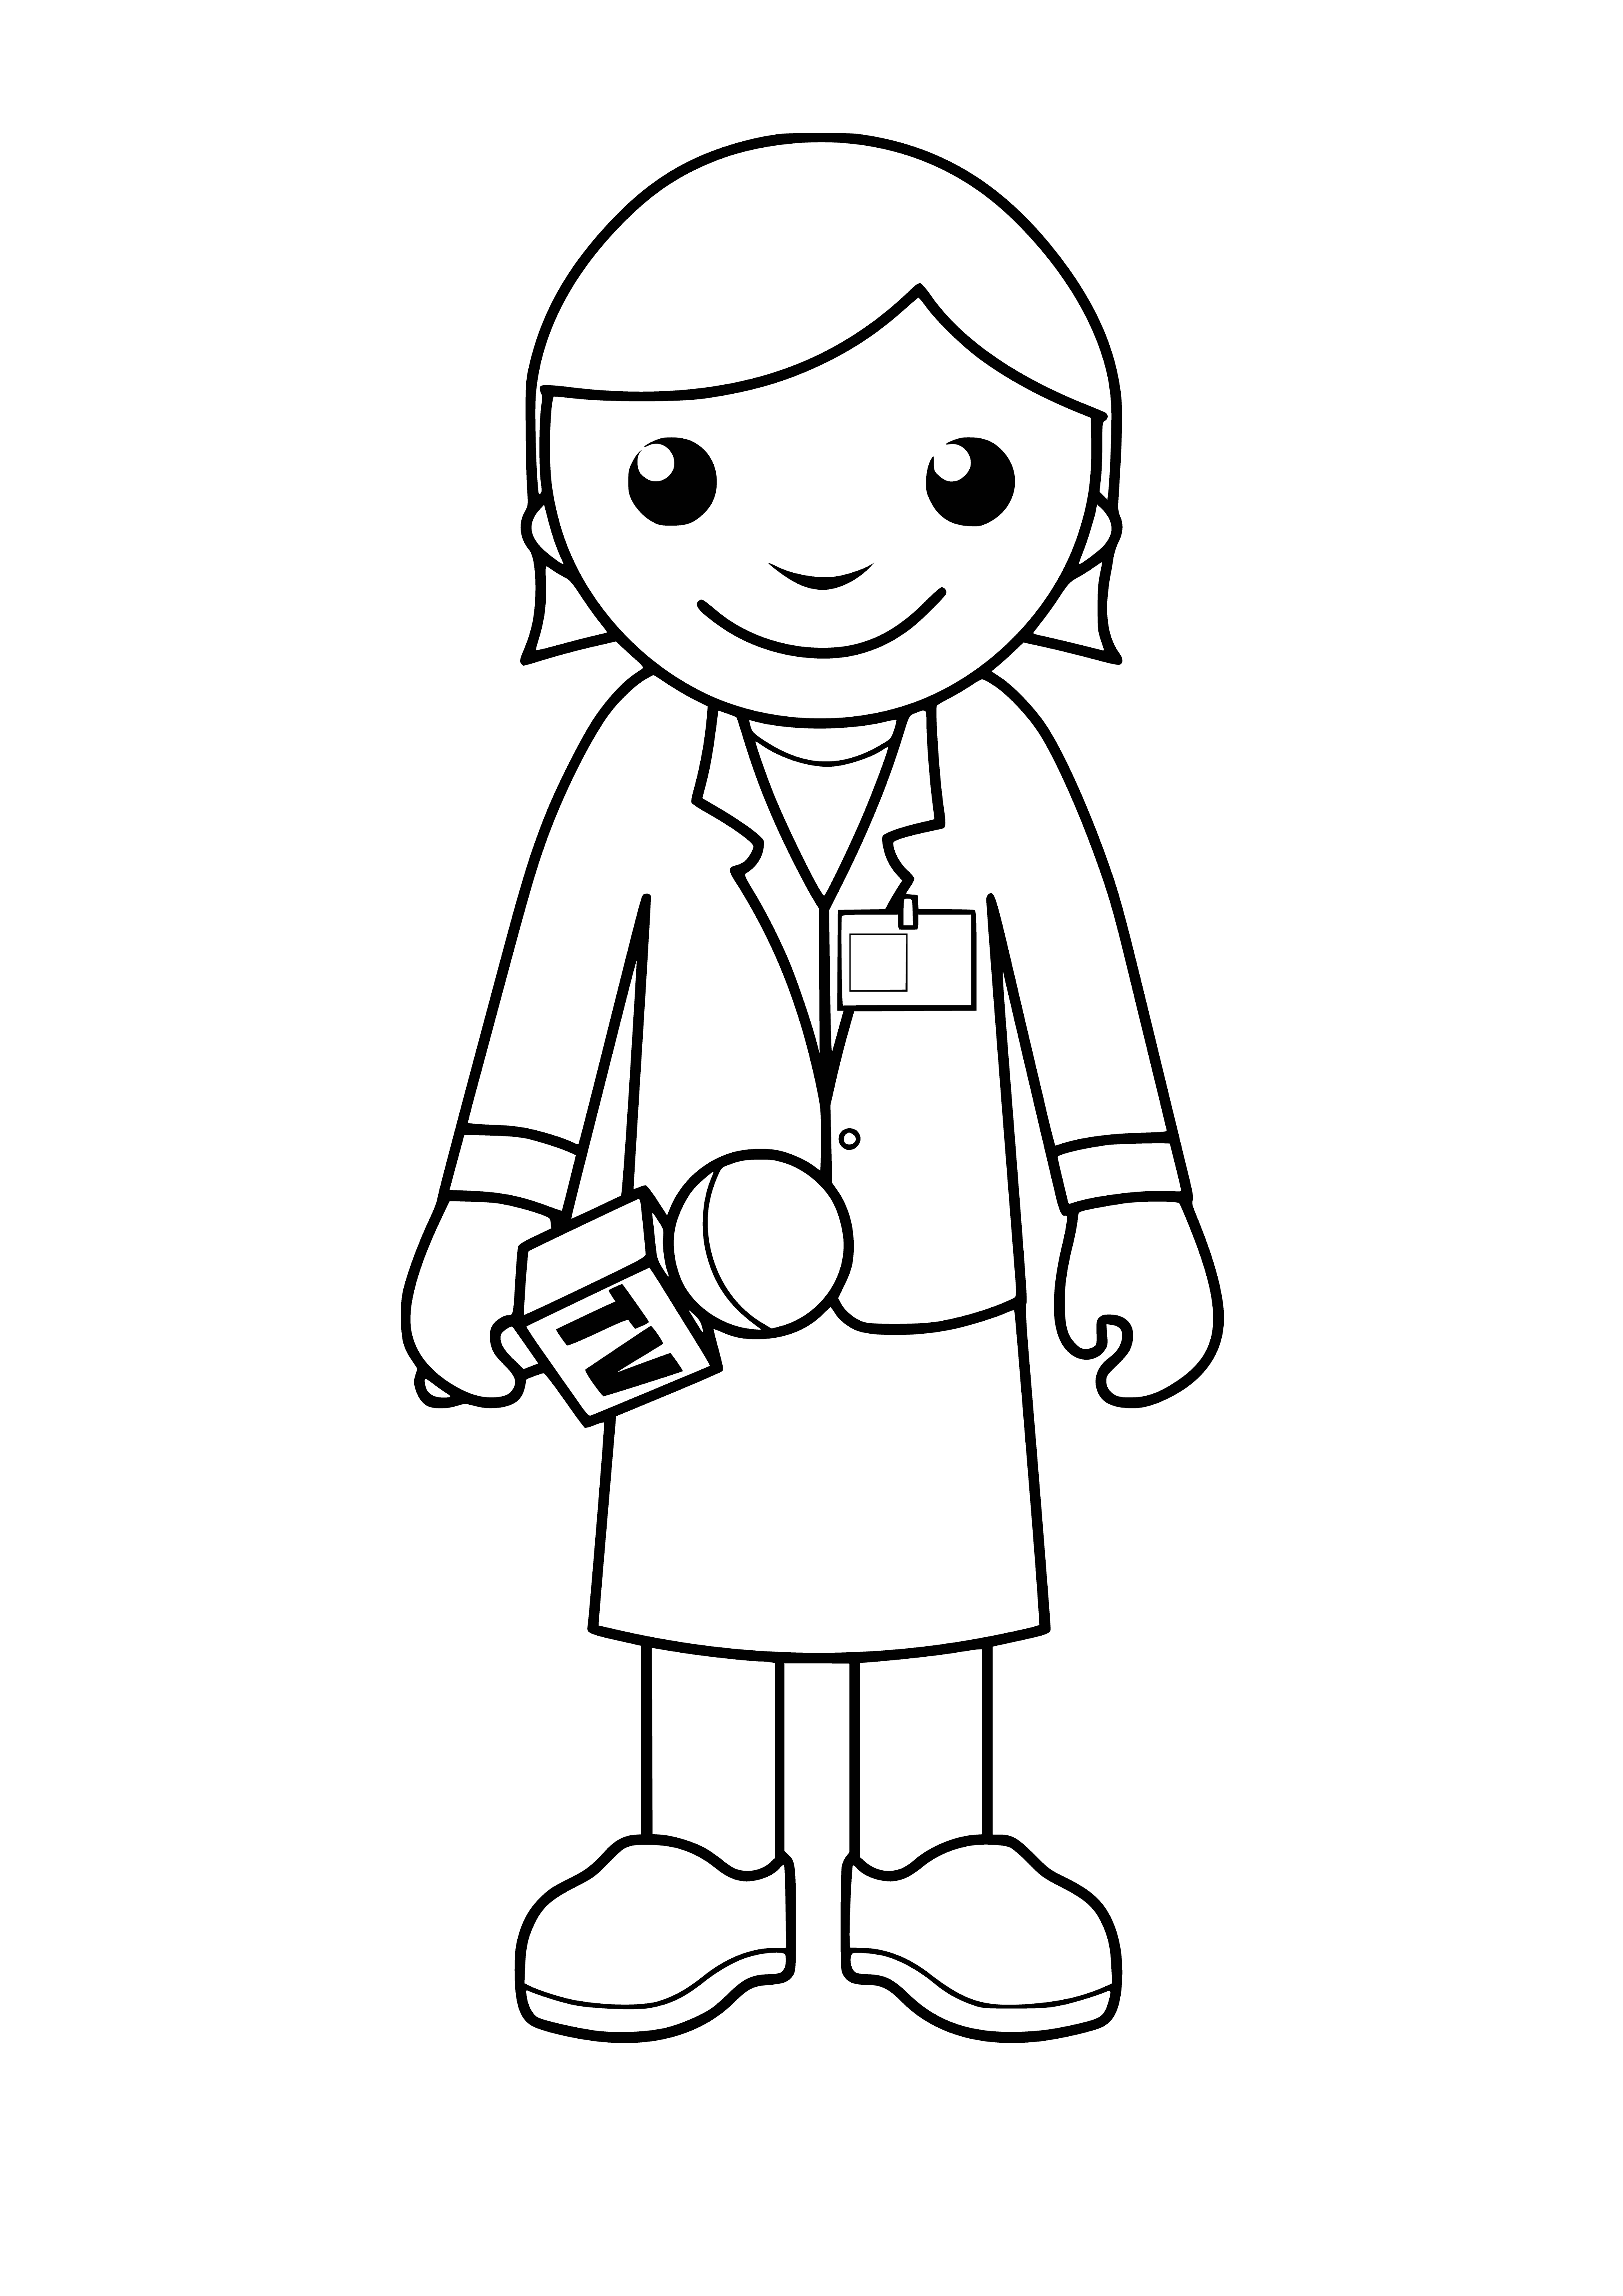 coloring page: Reporter using mic and headset in midst of broadcasting.